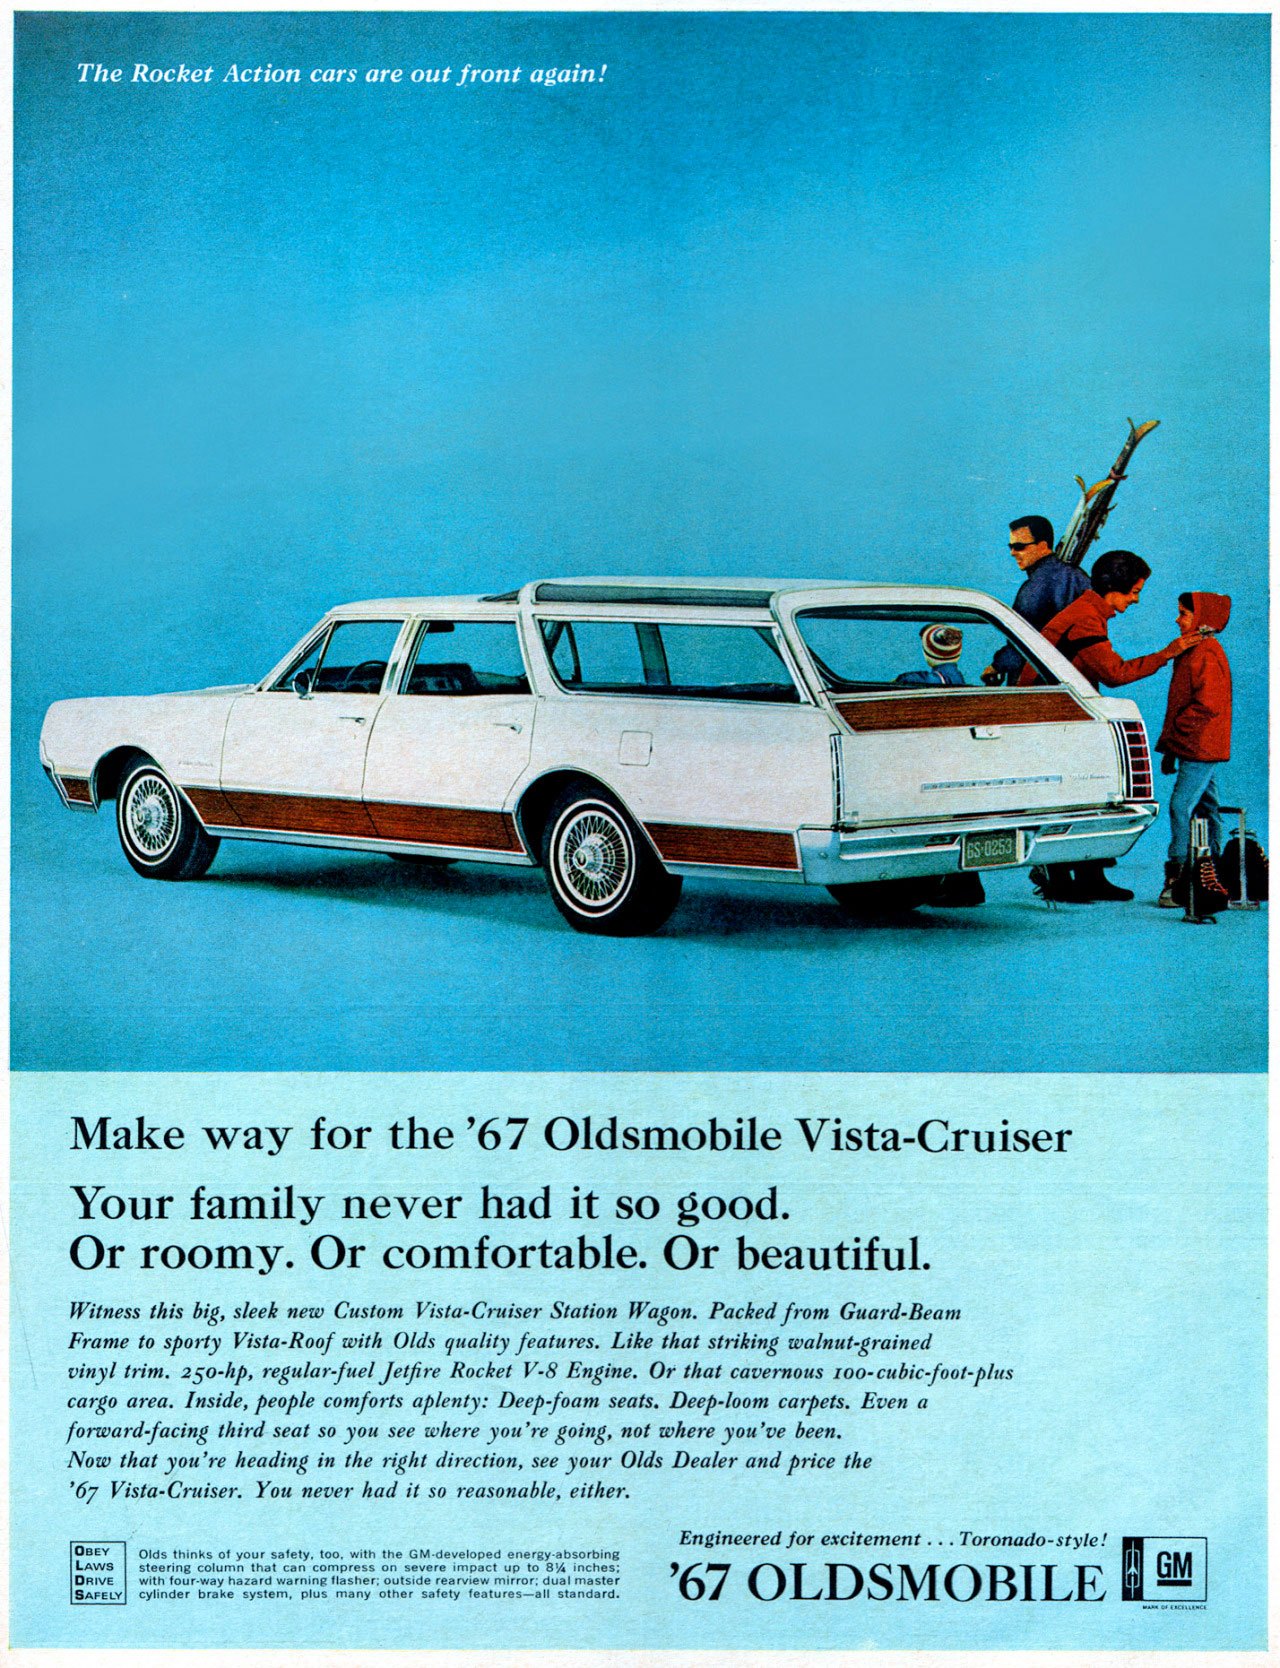 
The Rocket Action cars are out front again! 

Make way for the '67 Oldsmobile Vista-Cruiser Your family never had it so good. Or roomy. Or comfortable. Or beautiful. 
Witness this big, sleek new Custom Vista-Cruiser Station Wagon. Packed from Guard-Beam Frame to sporty Vista-Roof with Olds quality features. Like that striking walnut grained vinyl trim. 250-hp, regular fuel jetfire Rocket V-8 Engine. Or that cavernous '0o-cubic-foot-plus cargo area. Inside, people comforts aplenty: Deep foam seats. Deep-loom carpets. Even a forward-facing third seat so you see where you're going, not where you've been. Now that you're heading in the right direction, see your Olds Dealer and price the '67 Vista-Cruiser. You never had it so reasonable, either. 
OBEY LAWS SAFE, 
Olds thinks of your safety, too, with the M•d veloped n steennivolumn that can compress on severe impact up ; ,cy,rnfdoeur =teia=ezrrggs flasher: outside rearview mirror; dual master other safety features-ad standard. '67 OLDSMOBILE 
Engineered for excitement ...Toronado-style! 
km 
